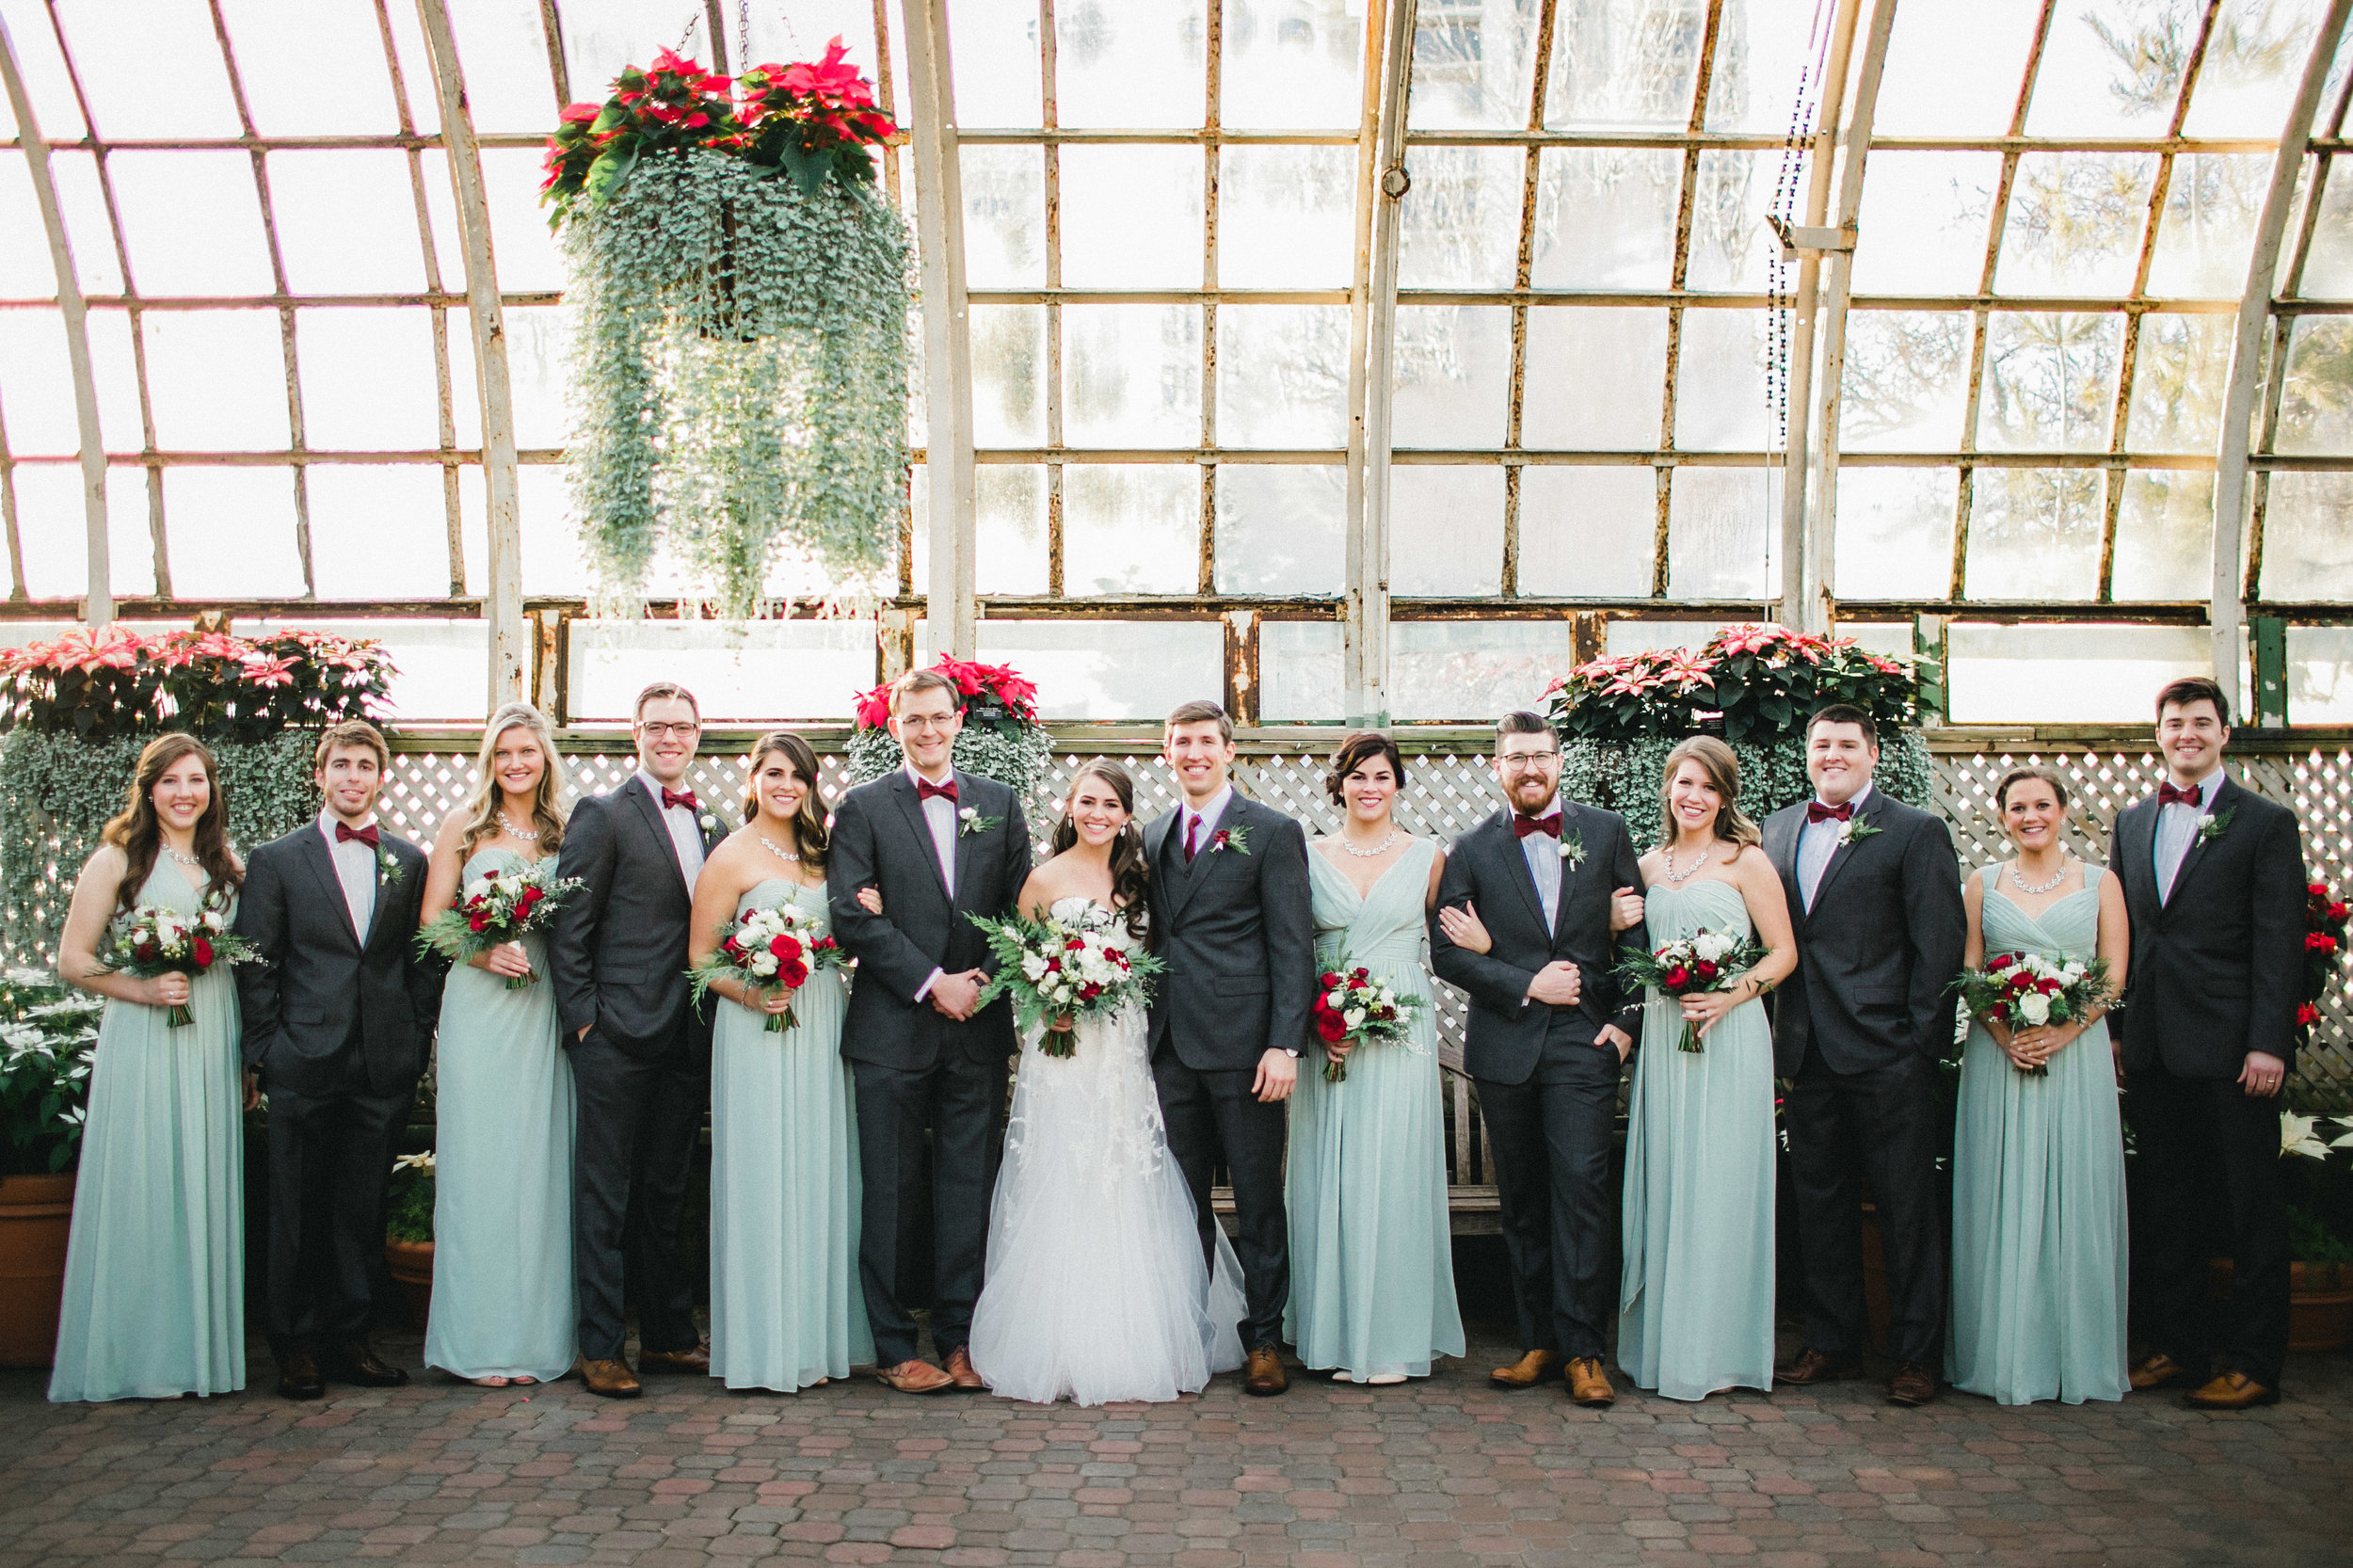 Wedding Portraits in a Conservatory